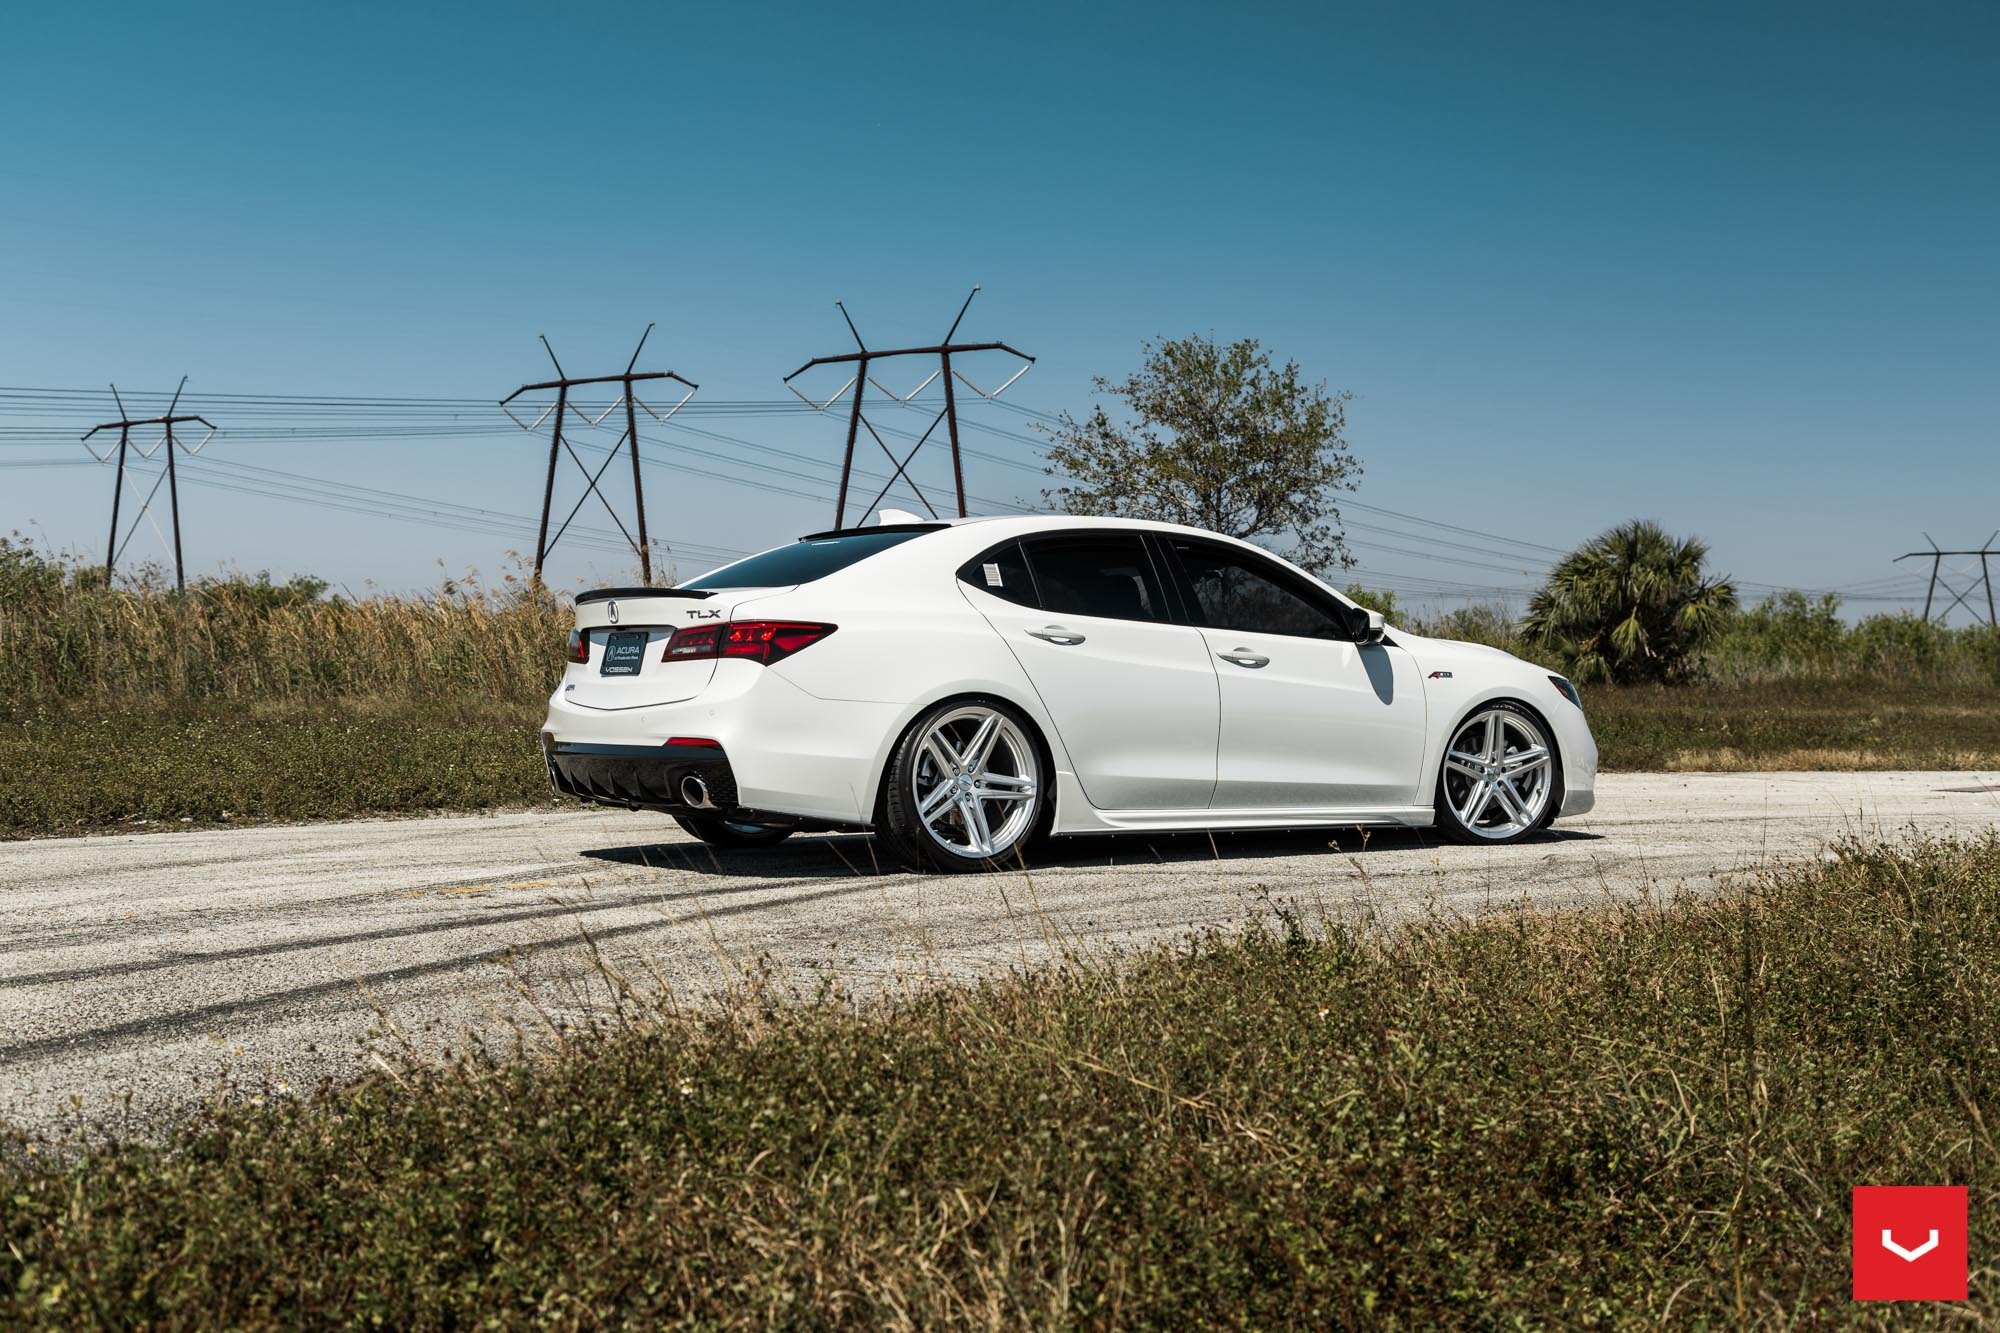 White Acura TLX with Aftermarket Rear Diffuser - Photo by Vossen